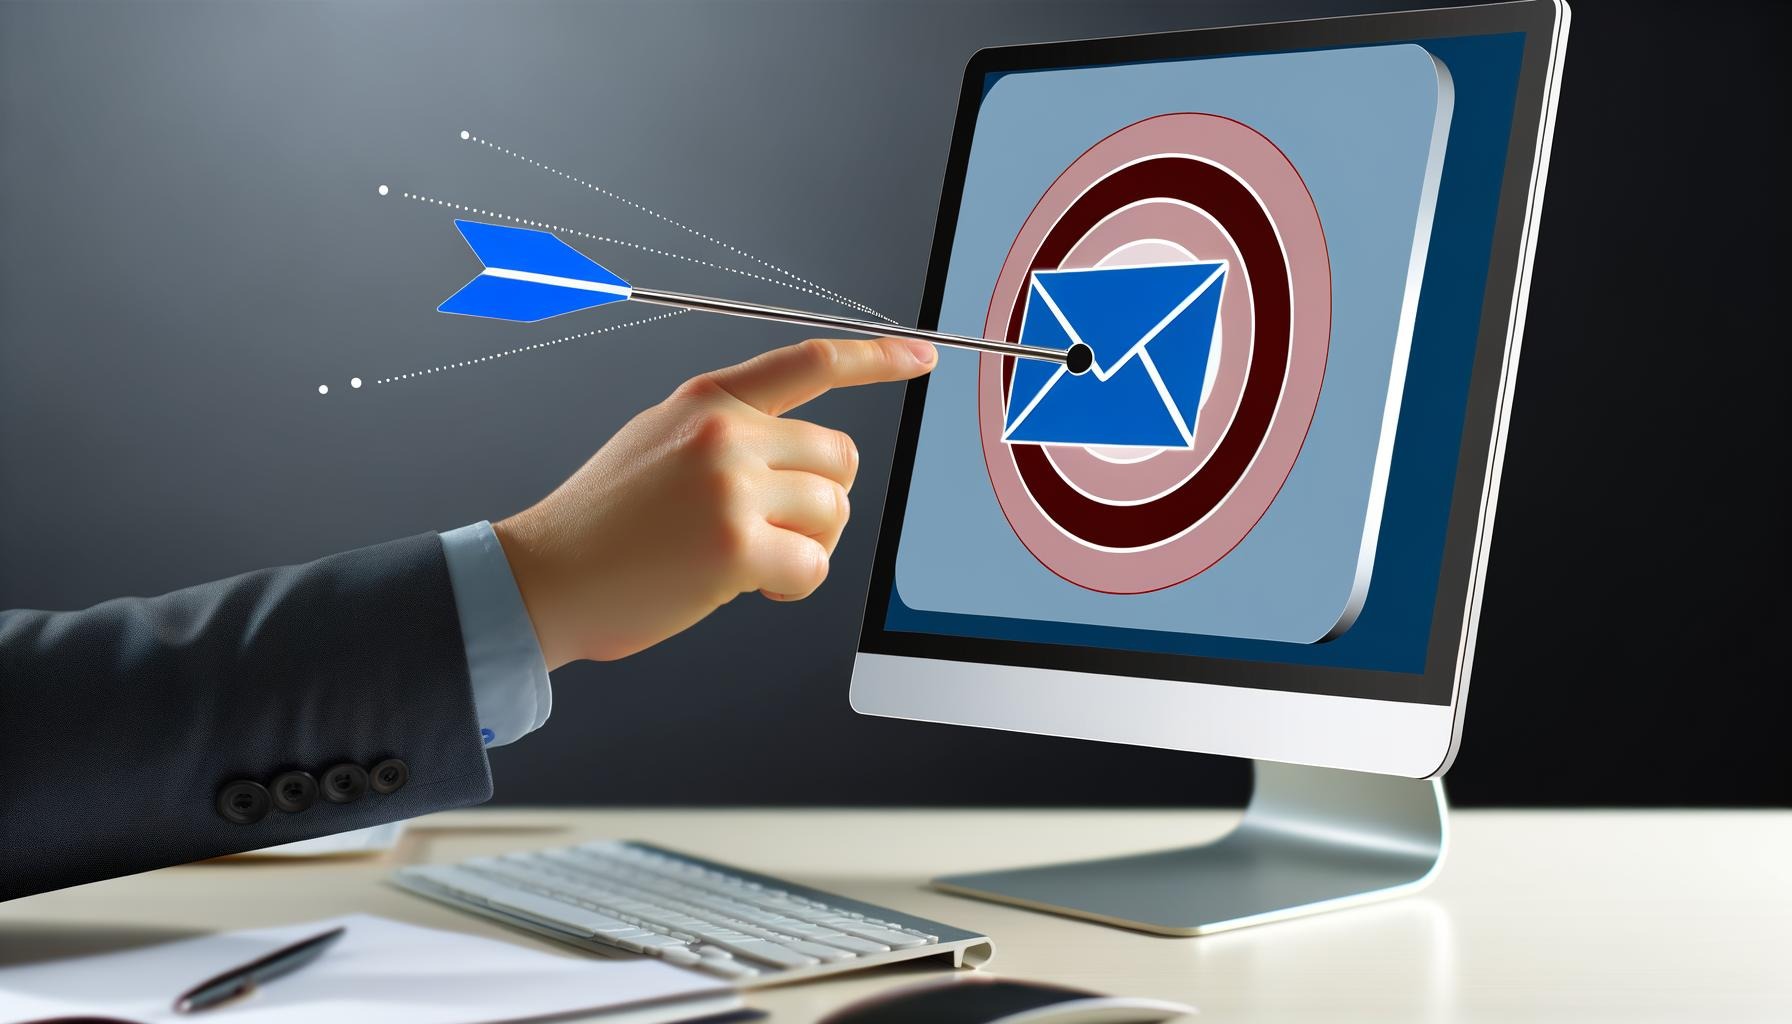 How to send targeted emails